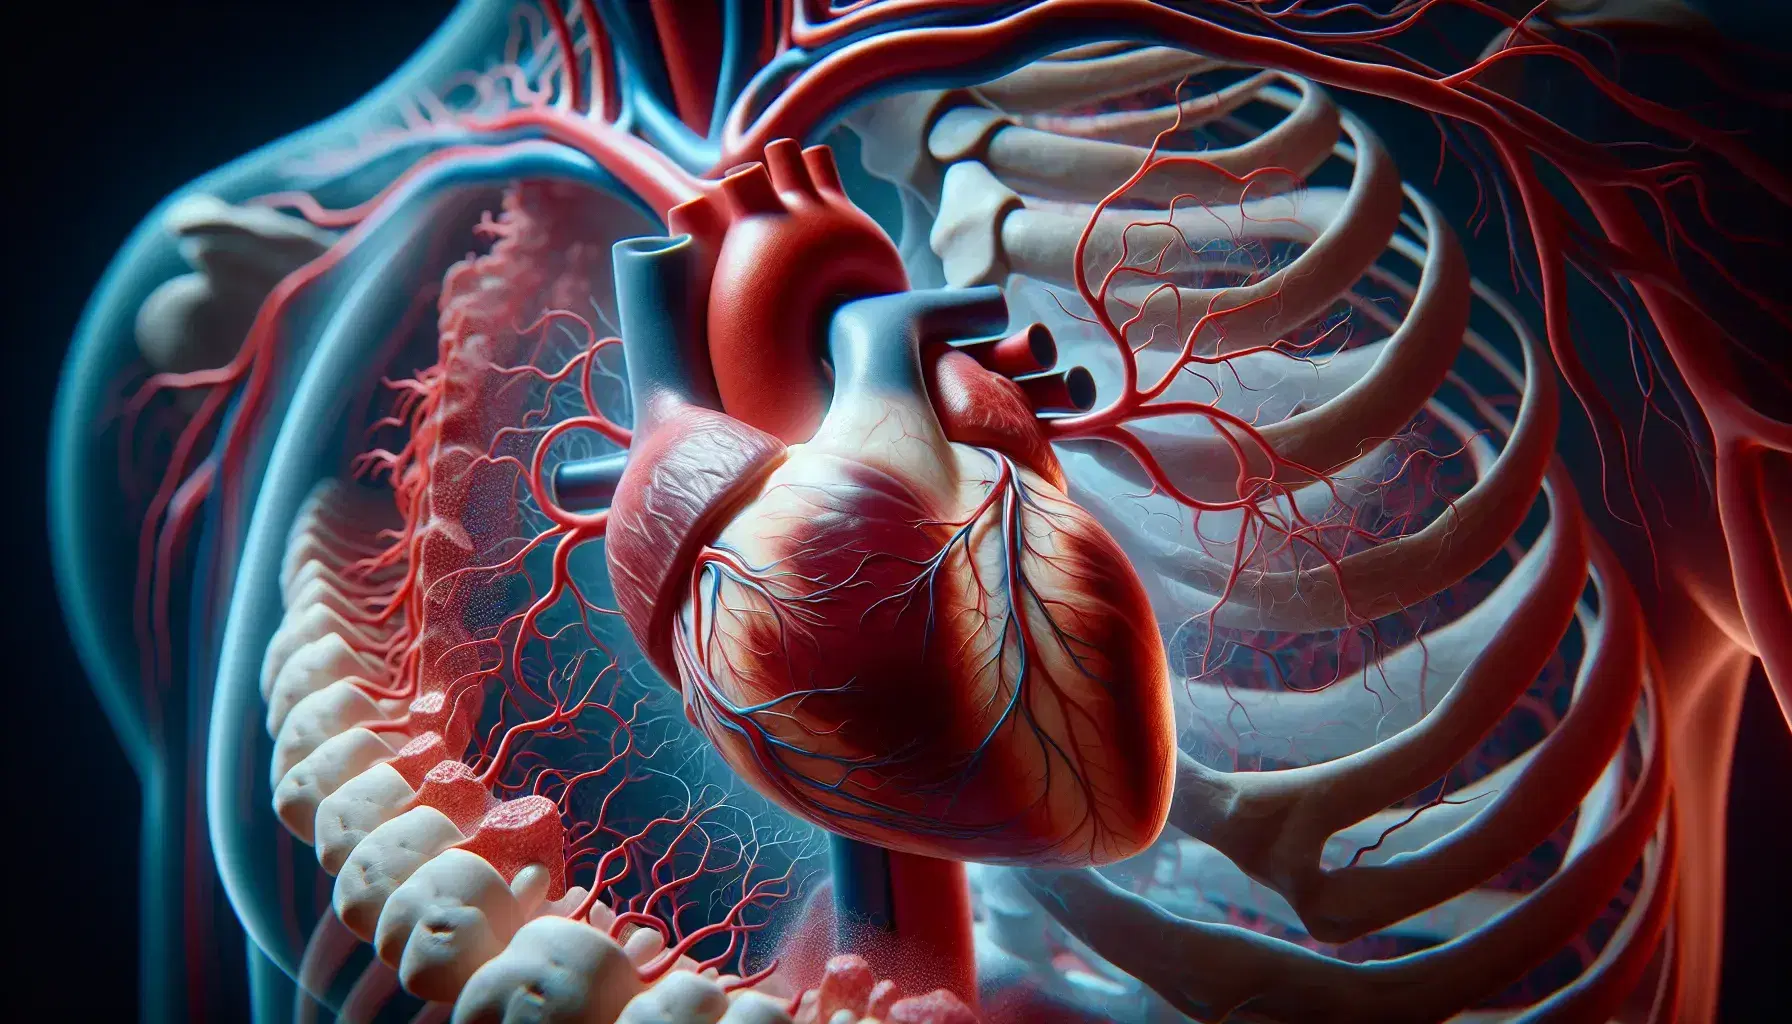 Detailed anatomical model of human heart with coronary arteries and veins, flanked by section of ribs, on background of blood vessels.